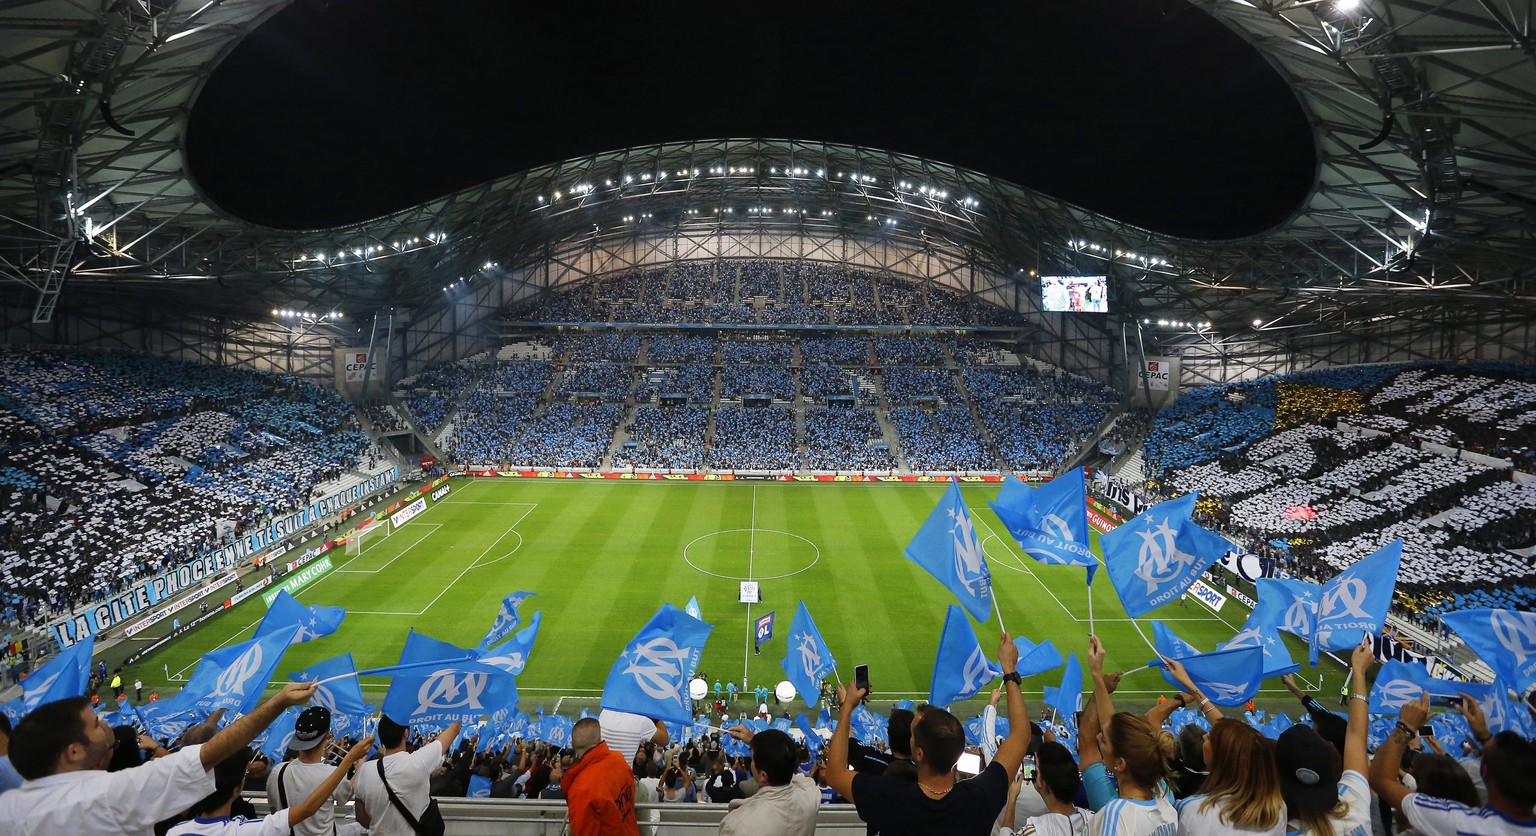 epa05270103 Picture taken on 20 September 2015 of an interior view of the Stade Velodrome in Marseille, southern France, during the French Ligue 1 soccer match between Olympique Marseille and Olympiqu ...